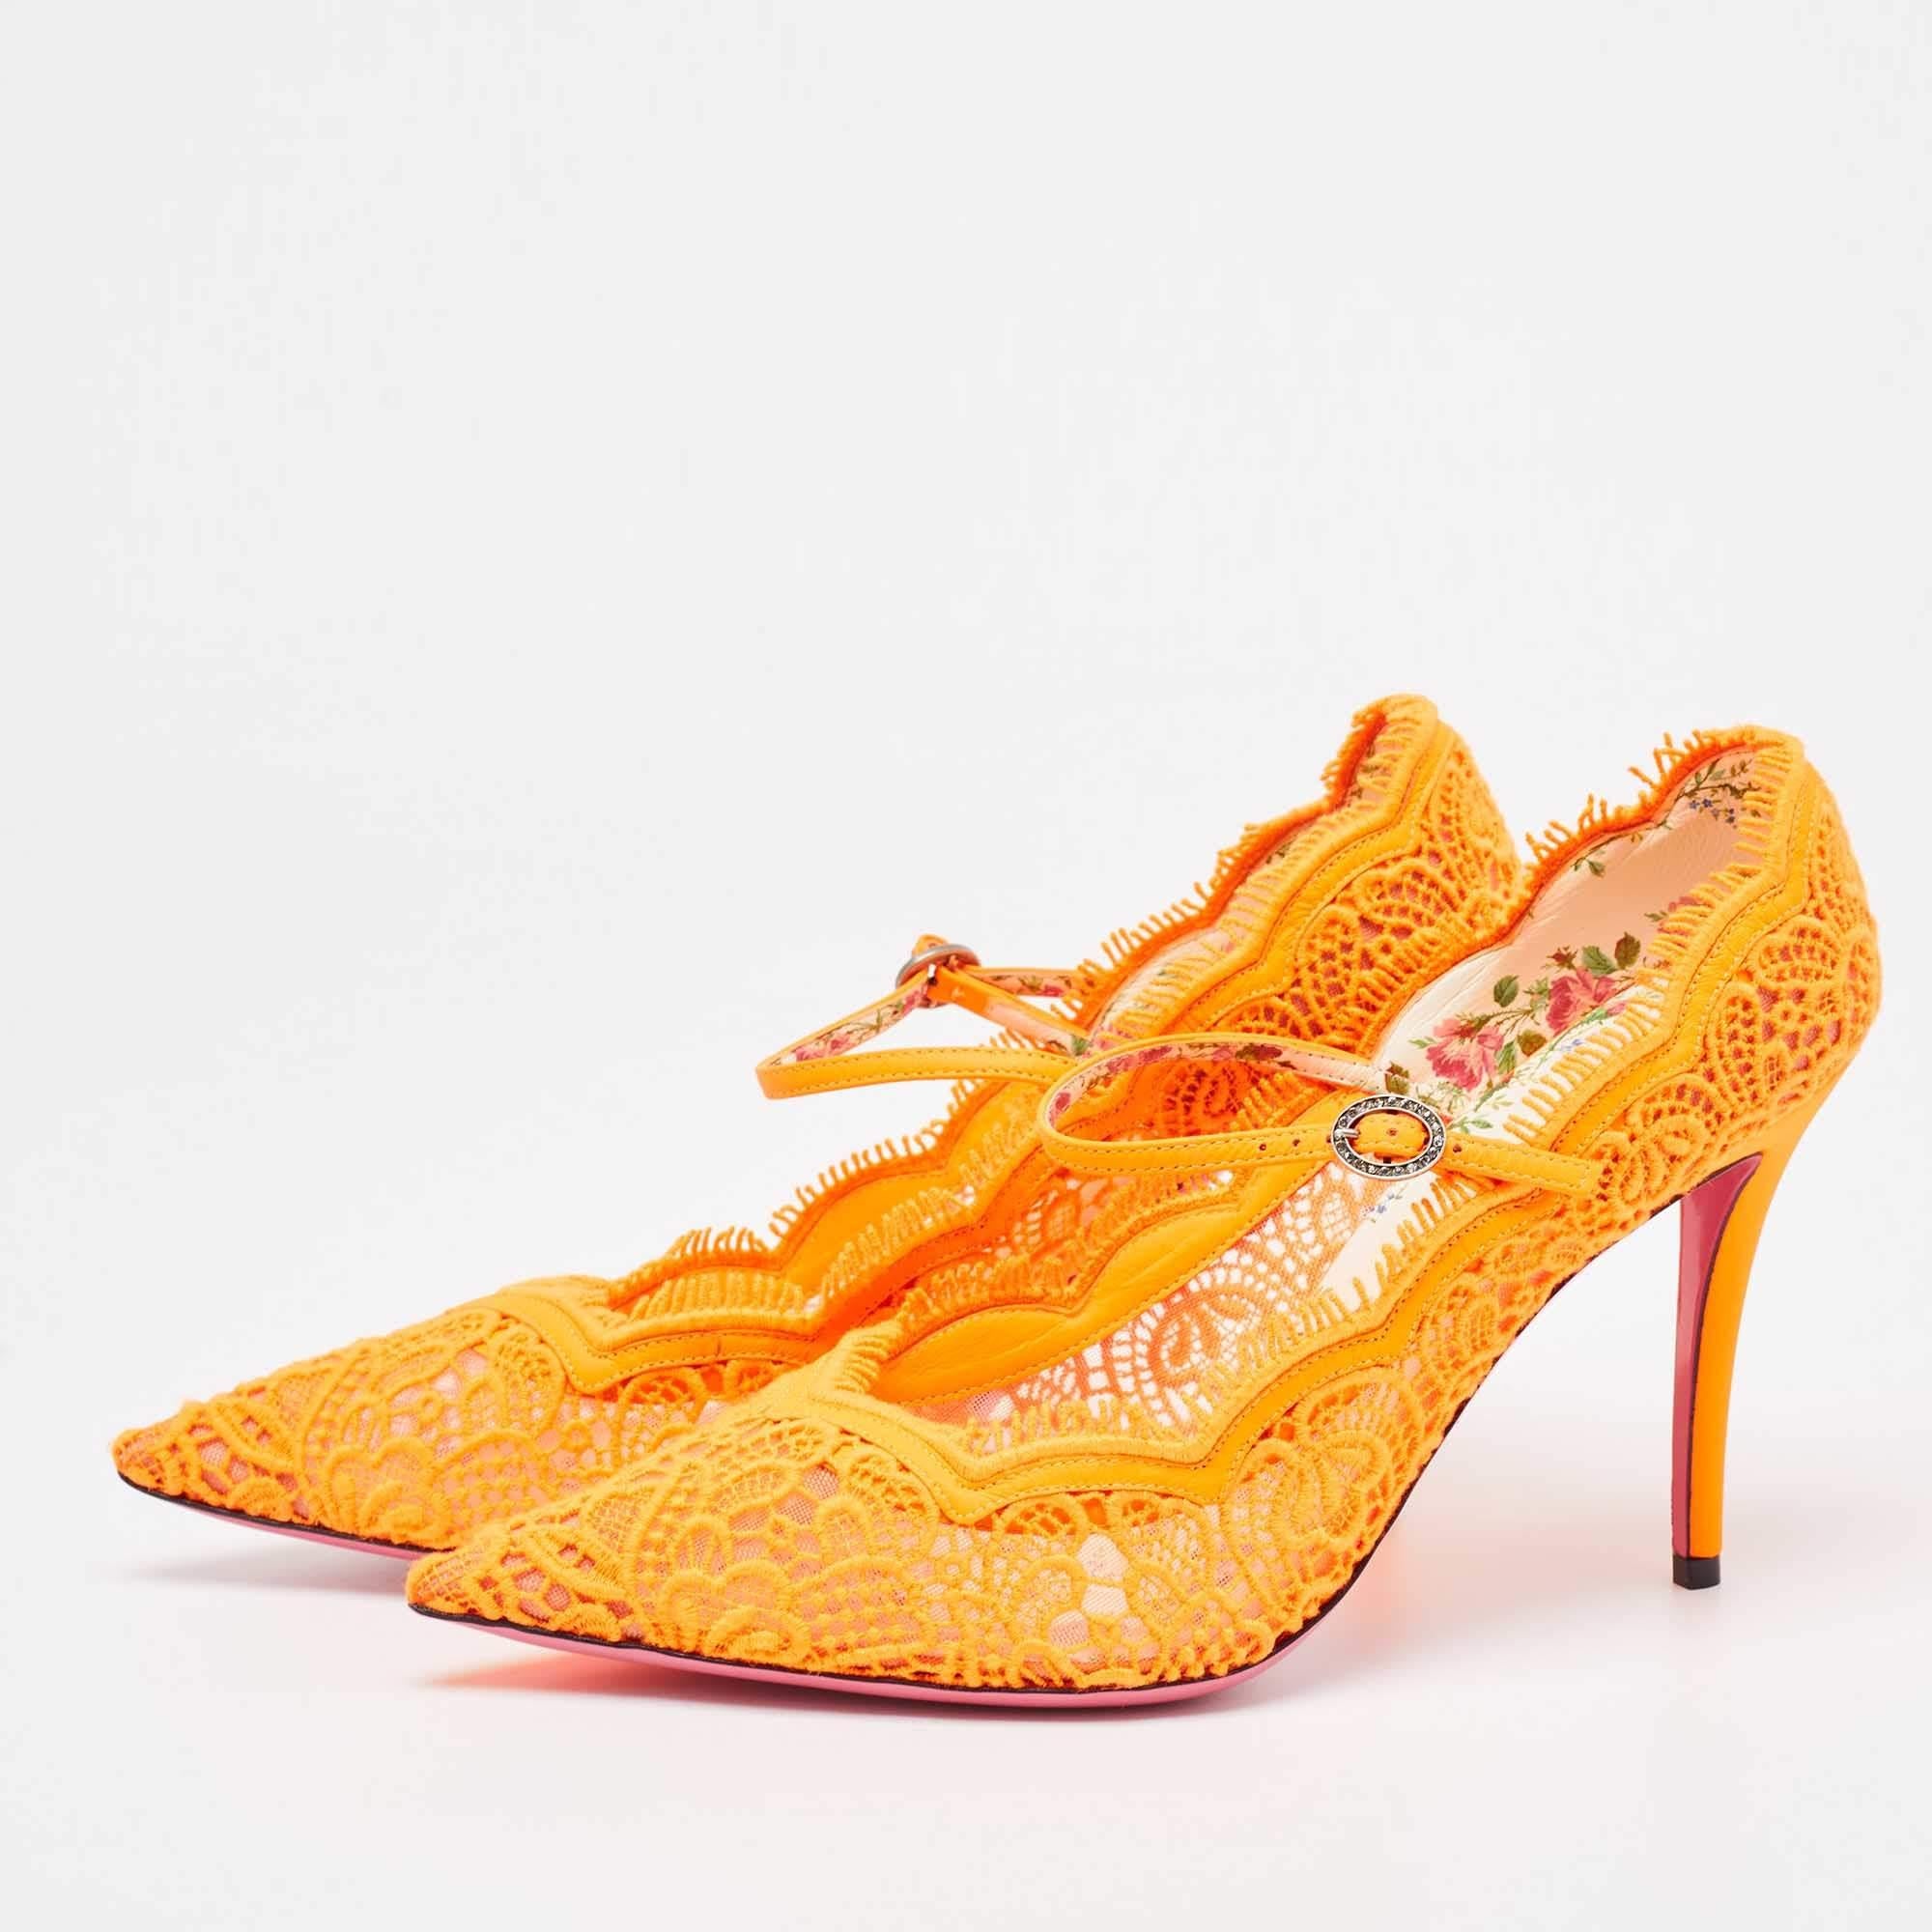 Women's Gucci Neon Orange Mesh and Lace Virginia Mary Jane Pumps Size 41